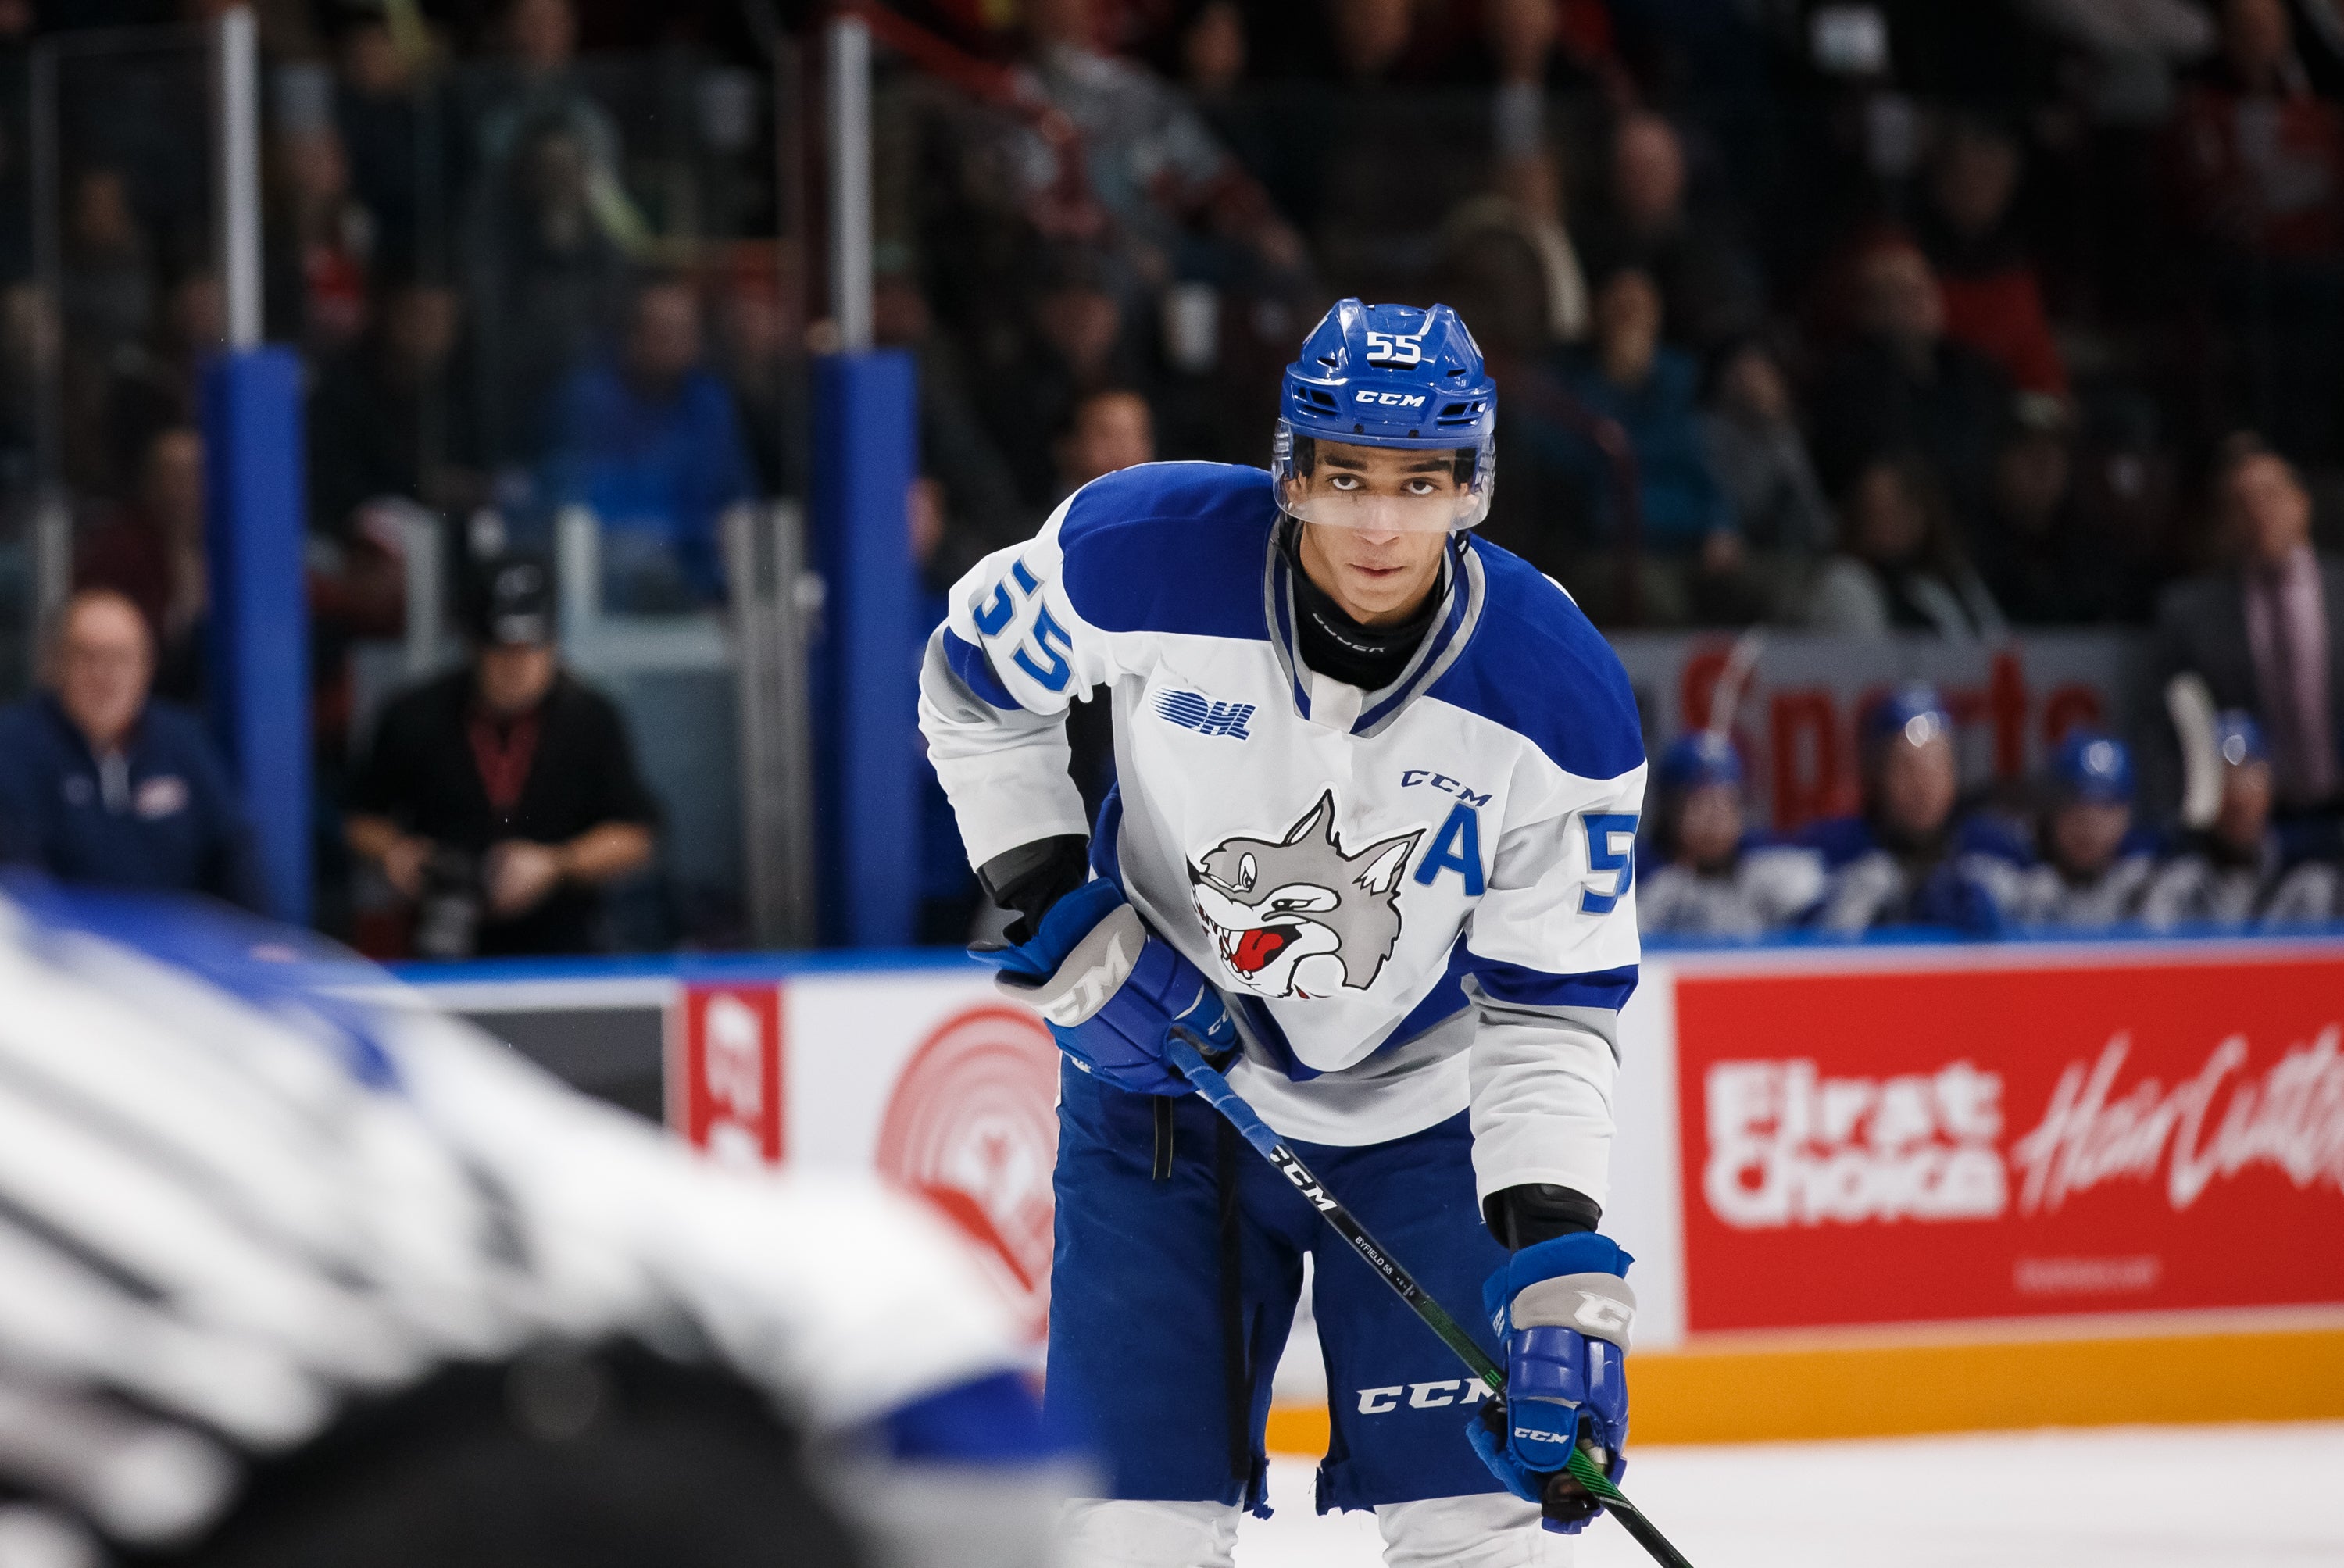 2019 NHL Draft Profile: Alex Newhook scouting report